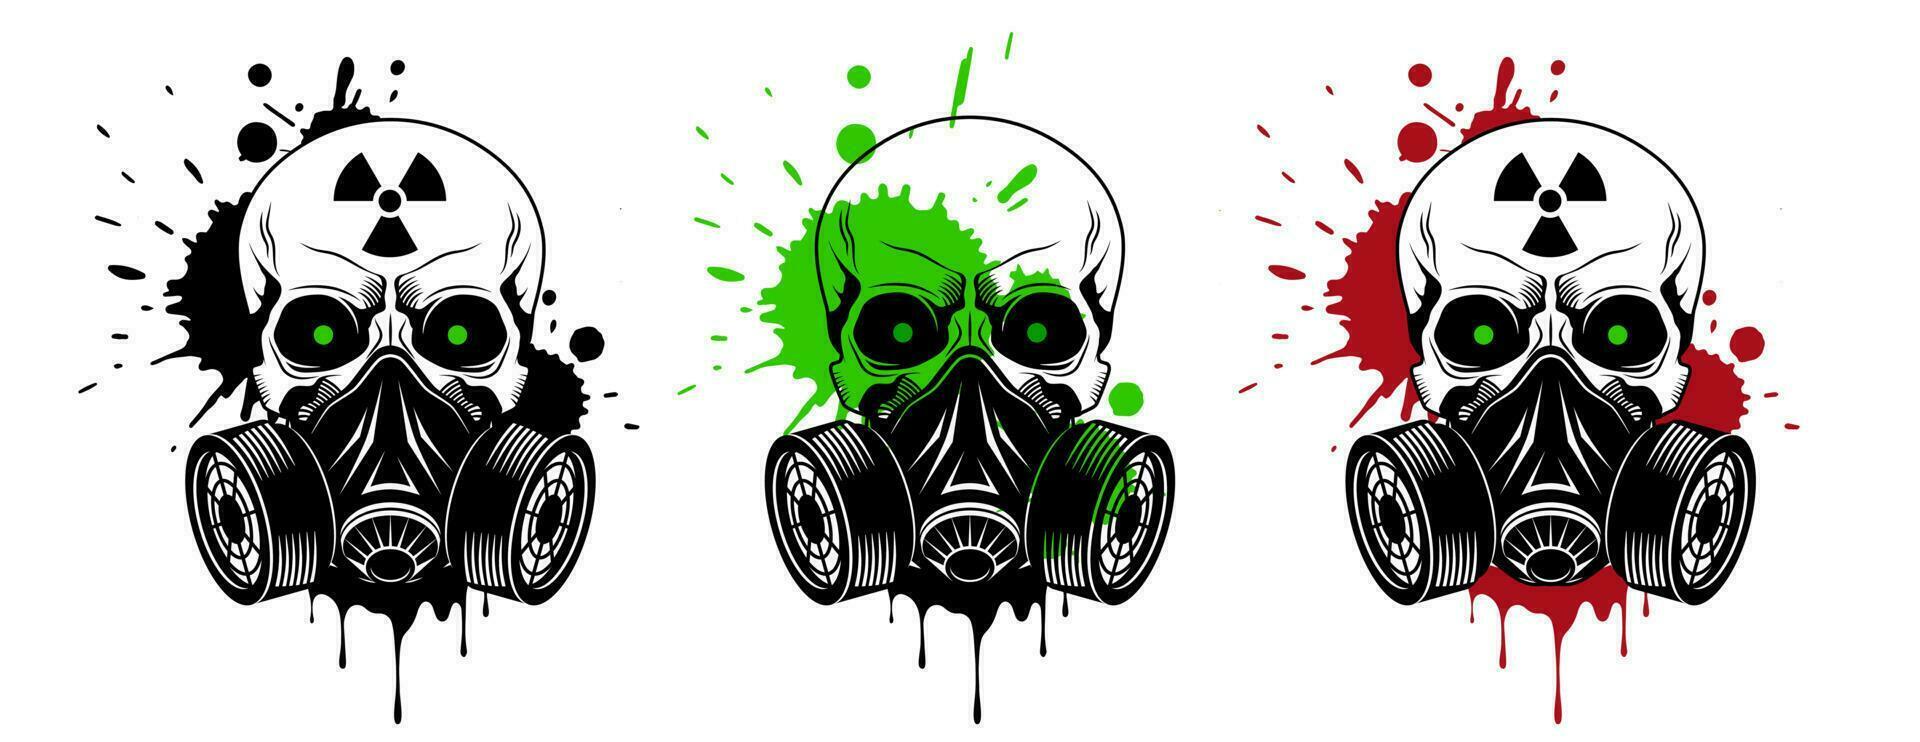 Vector skulls set with gas mask, radiation sign, glowing eyes and paint splashes and drips on white background. Grunge vector illustration